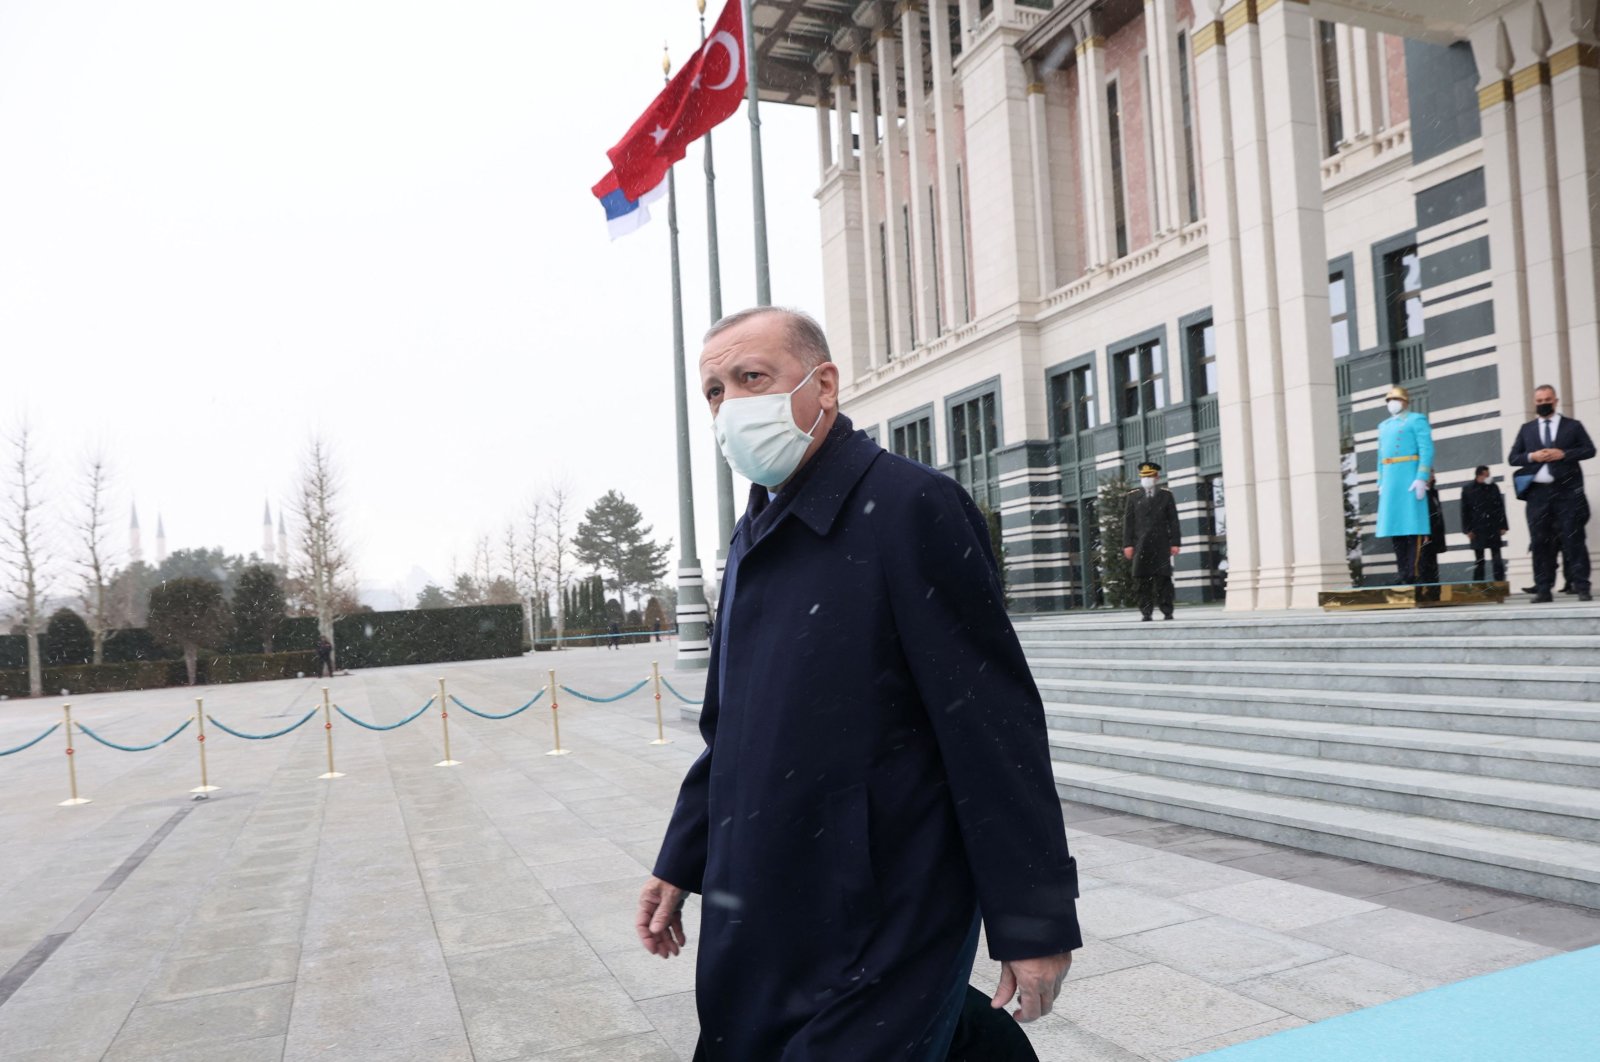 This photo taken on January 18, 2022 shows President Recep Tayyip Erdoğan at the courtyard to welcome the Serbian President at the presidential residence in Ankara. (AFP Photo)